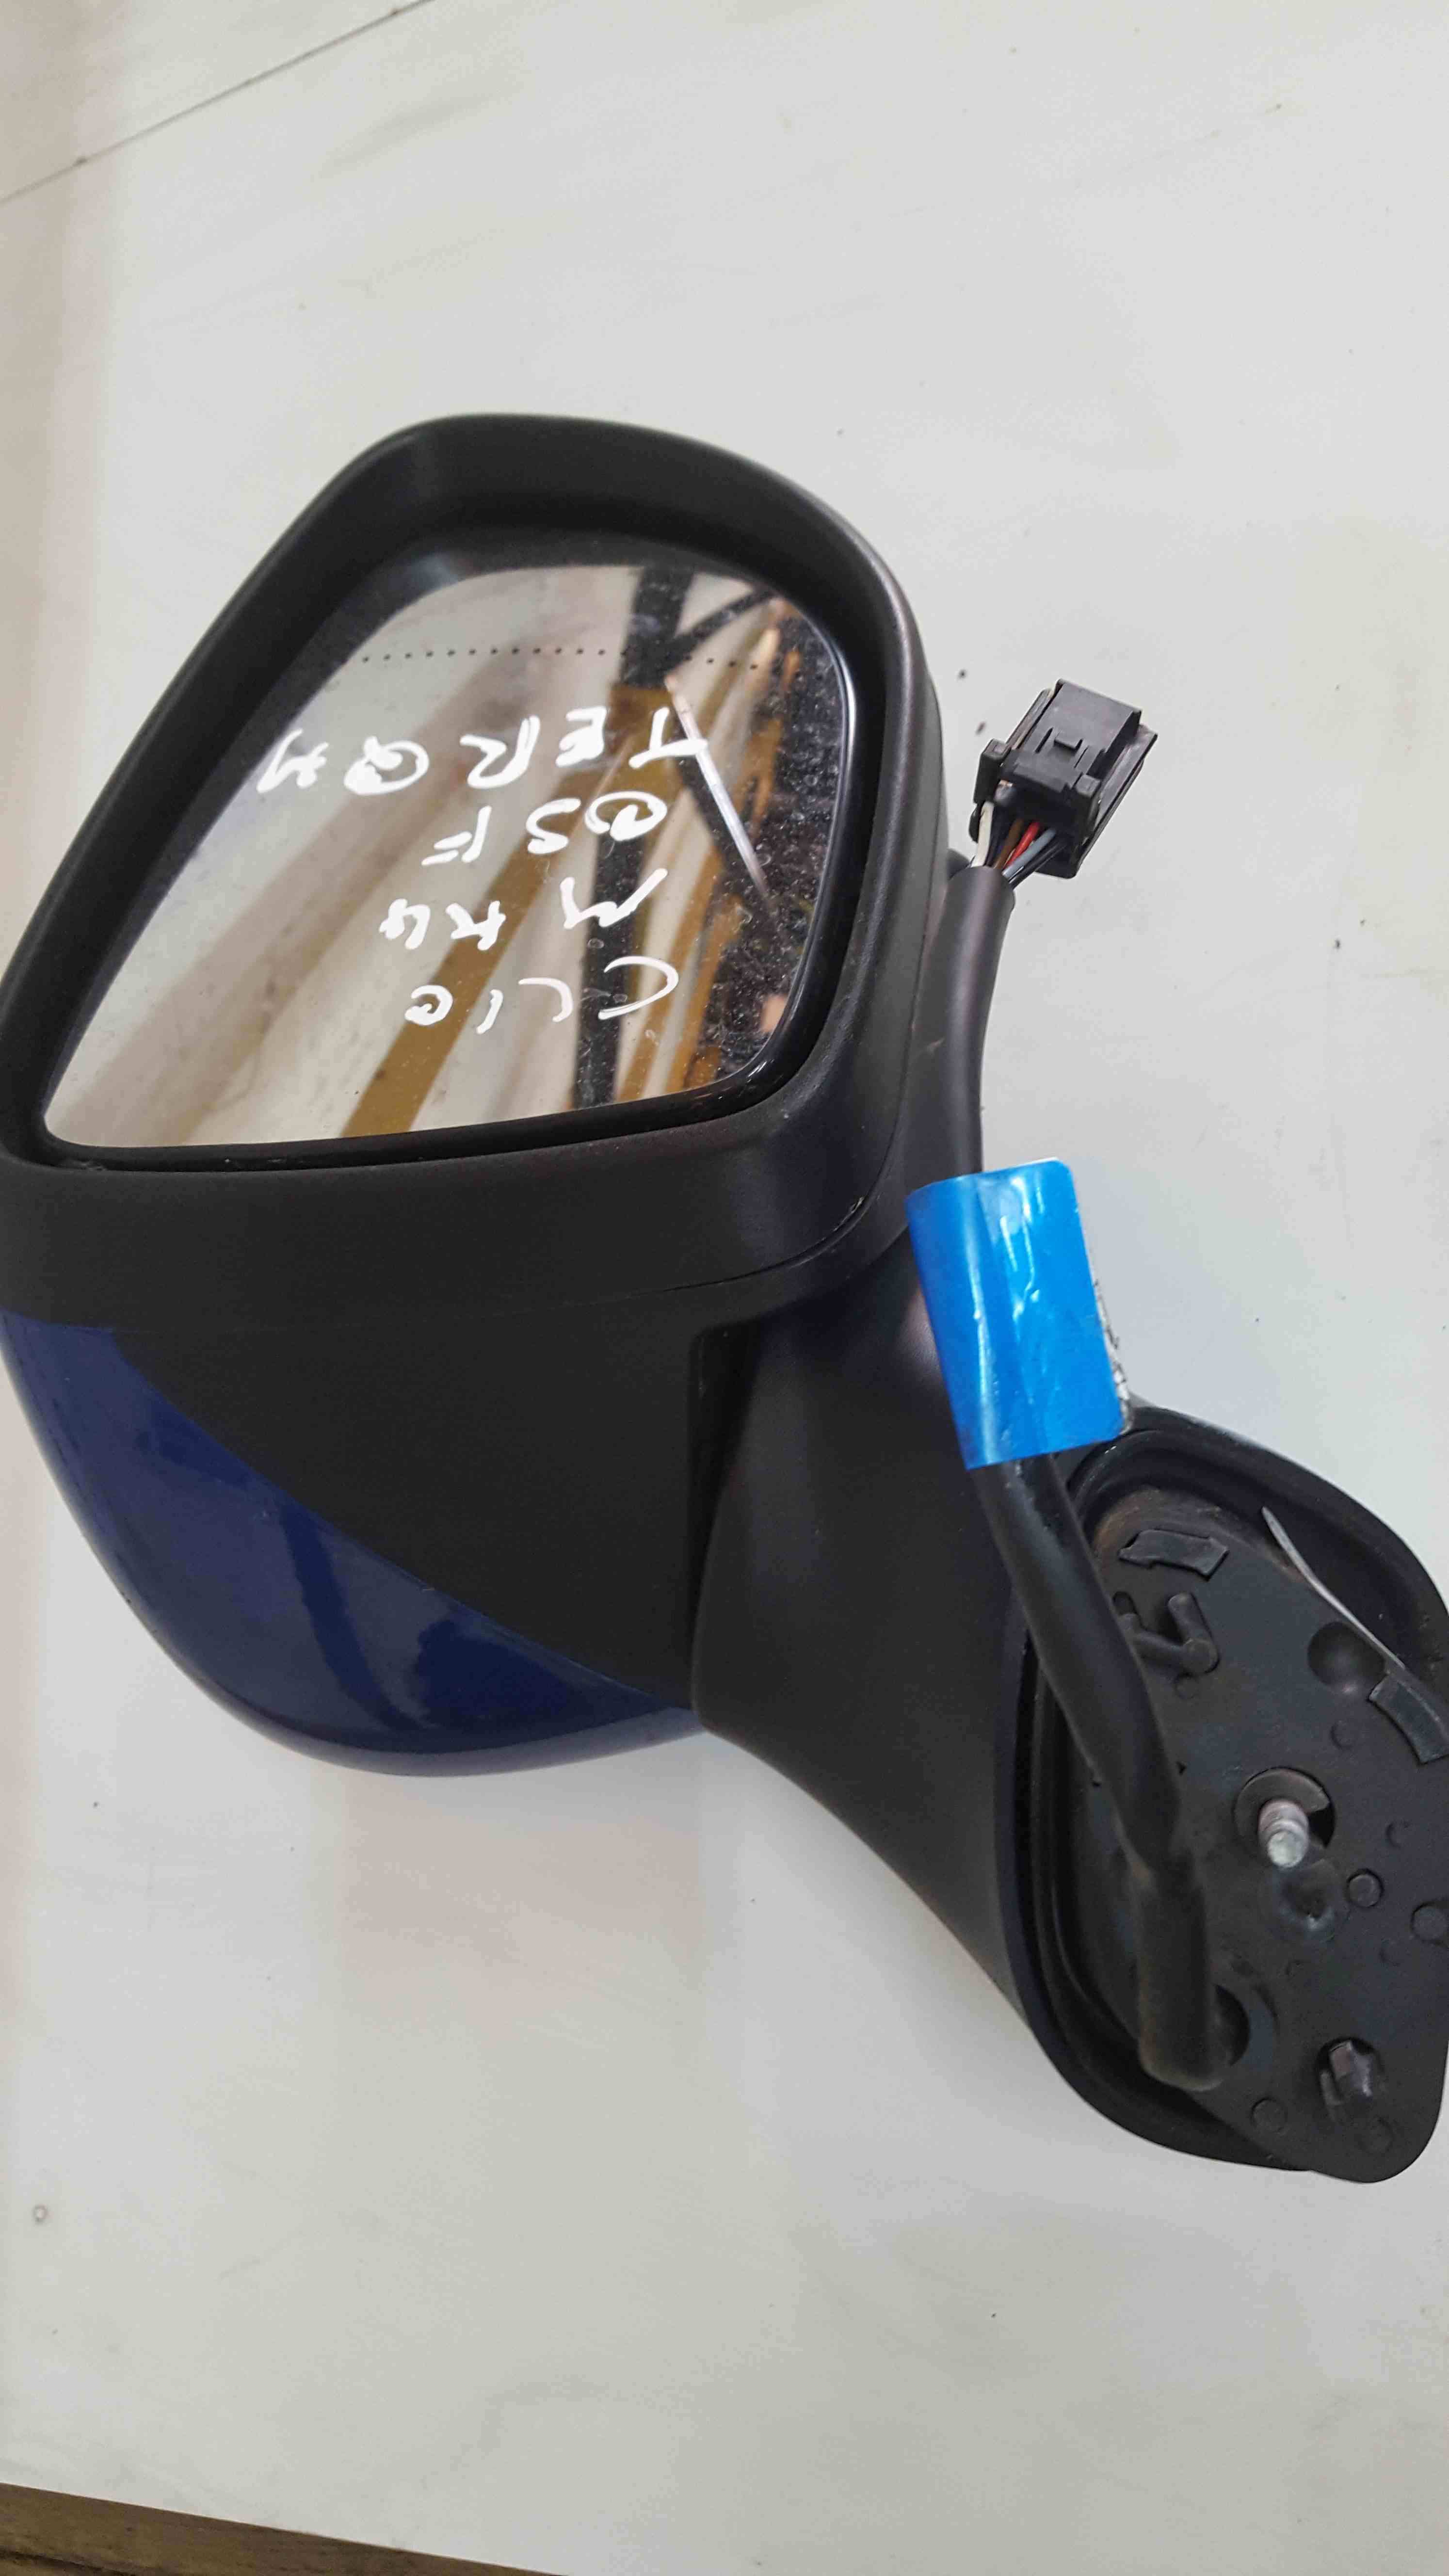 Renault Clio MK4 2013-2018 Drivers Os Wing Mirror Blue Terqh Folding